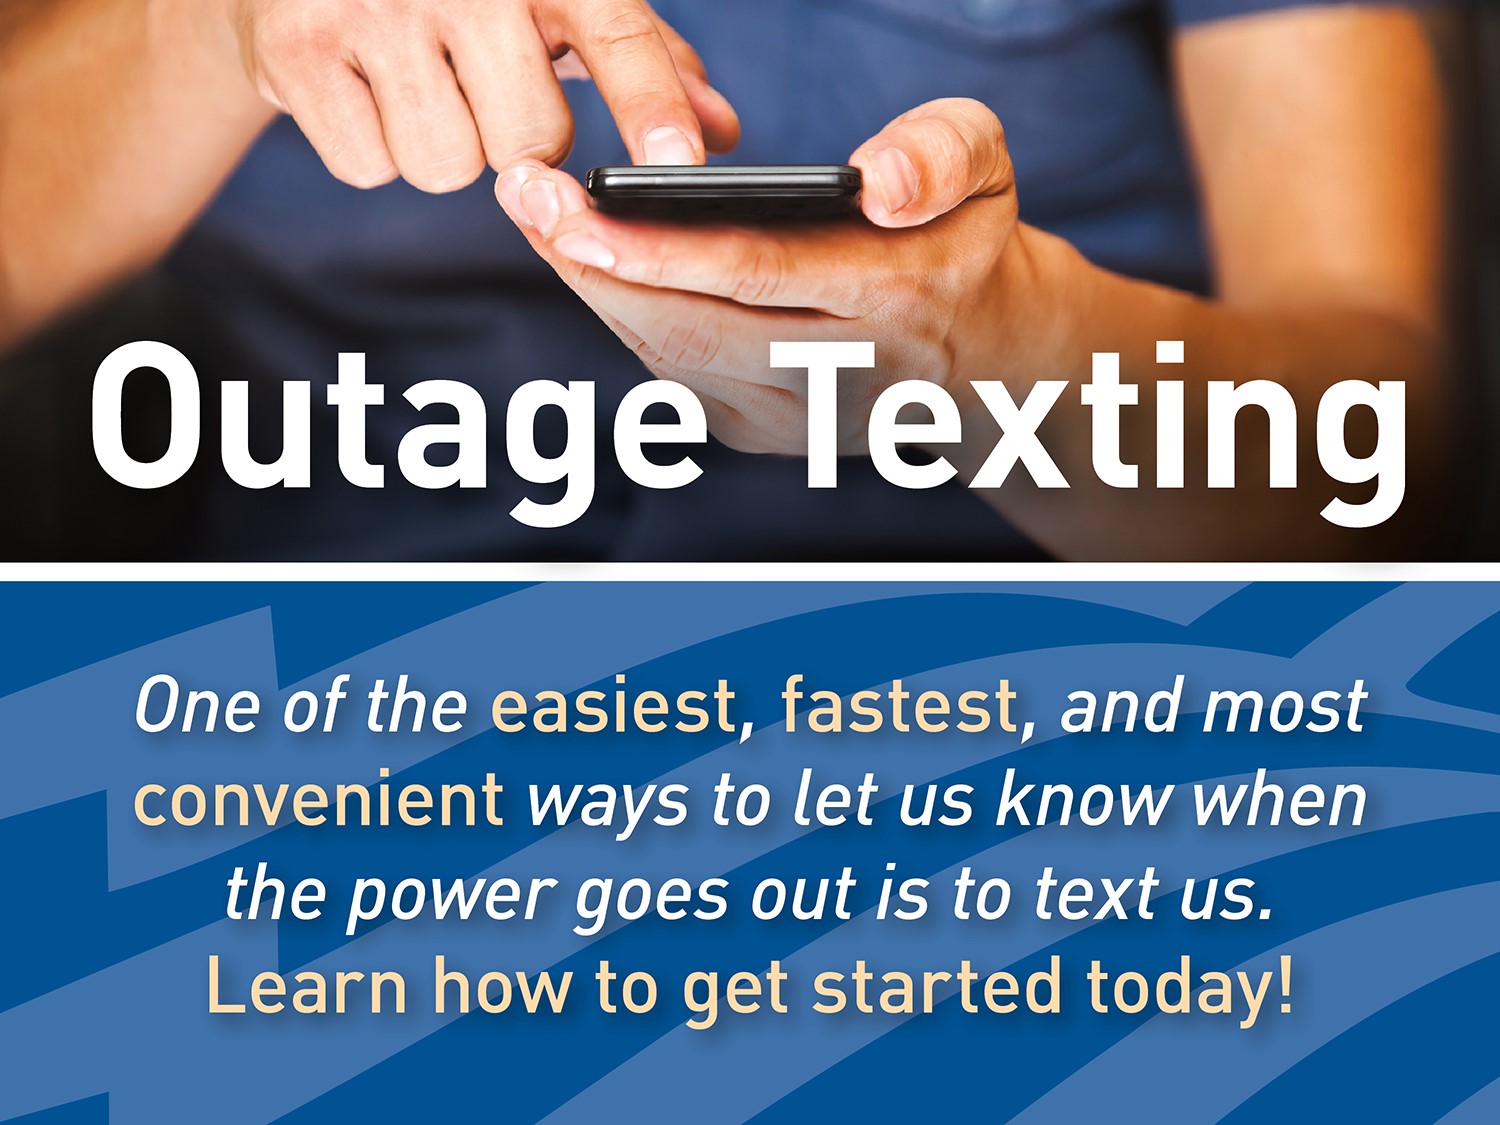 Outage Texting Introduction